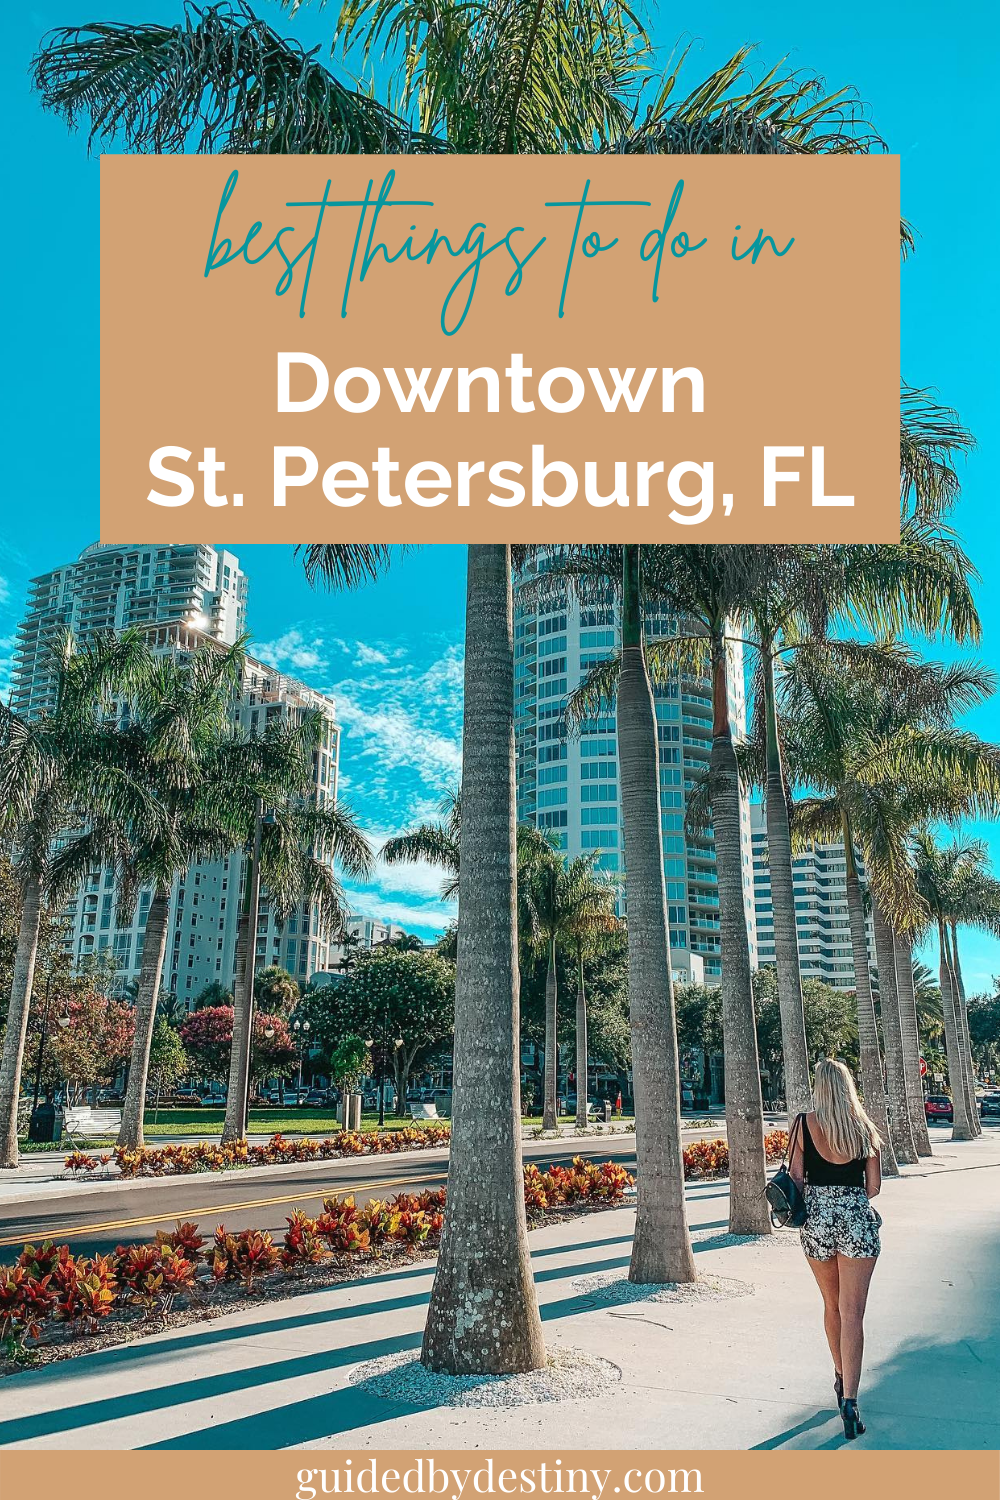 best things to do in downtown St. Petersburg, FL